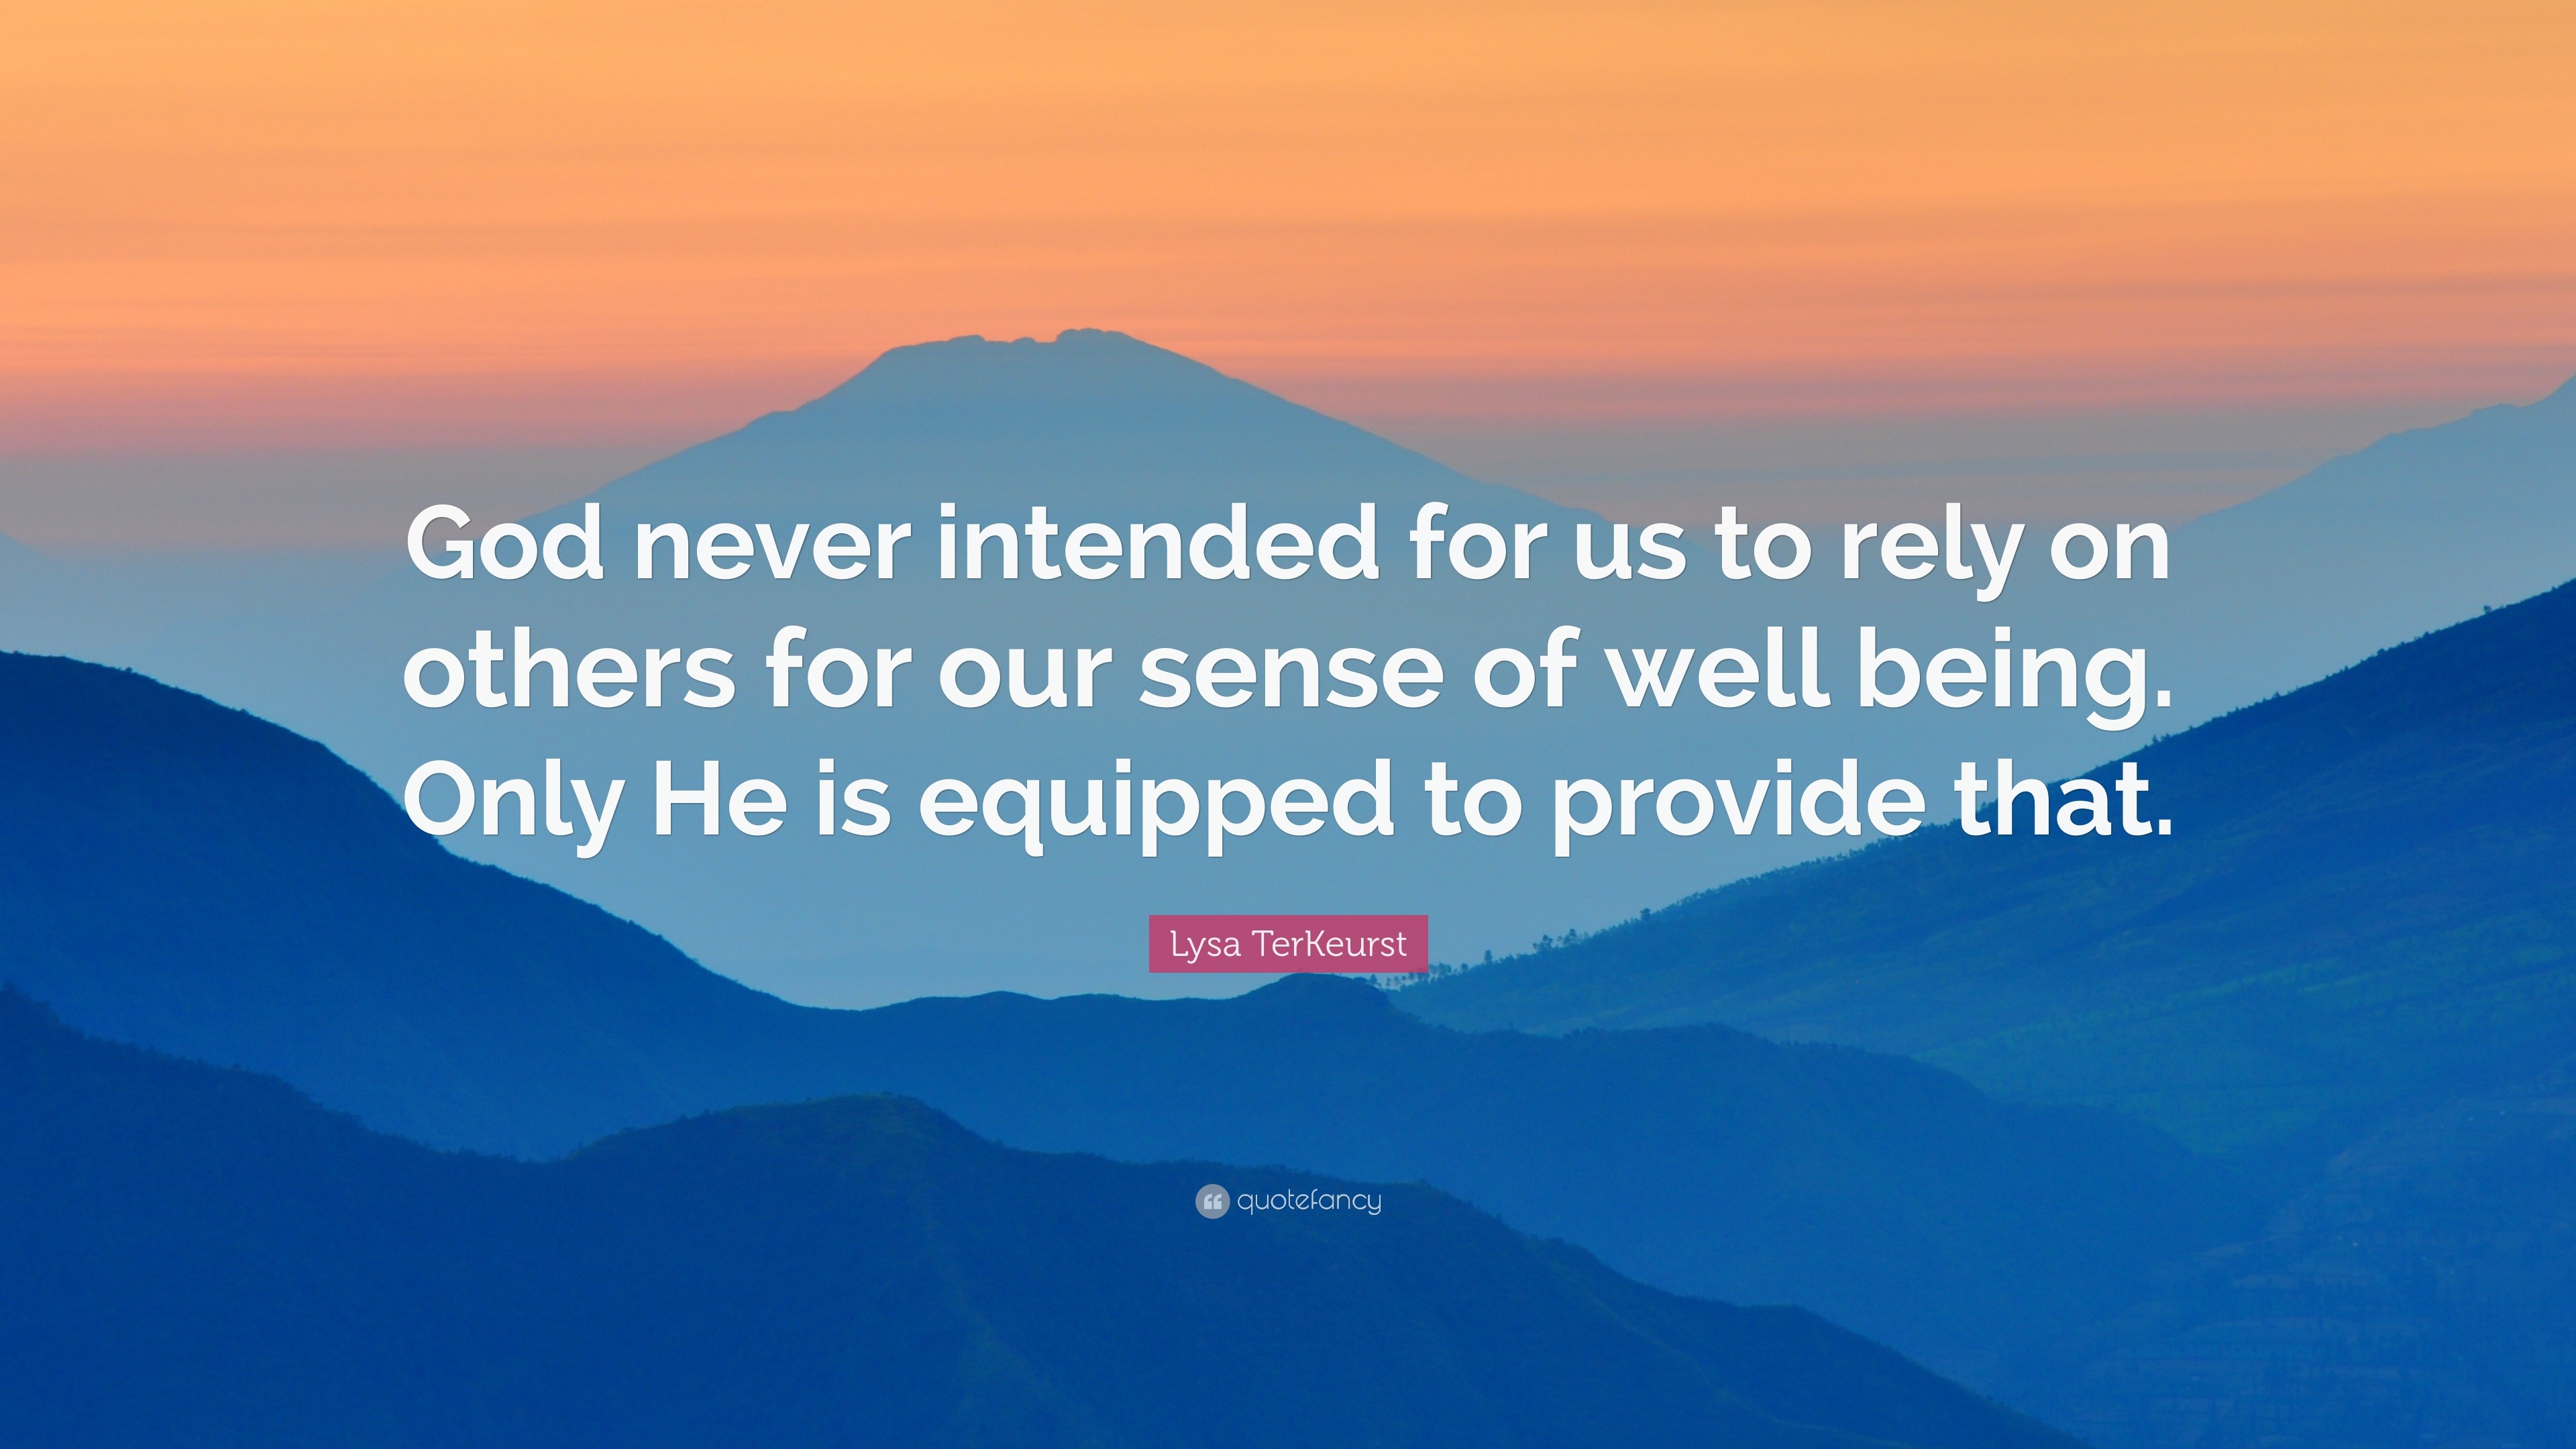 Lysa TerKeurst Quote: “God never intended for us to rely on others for ...